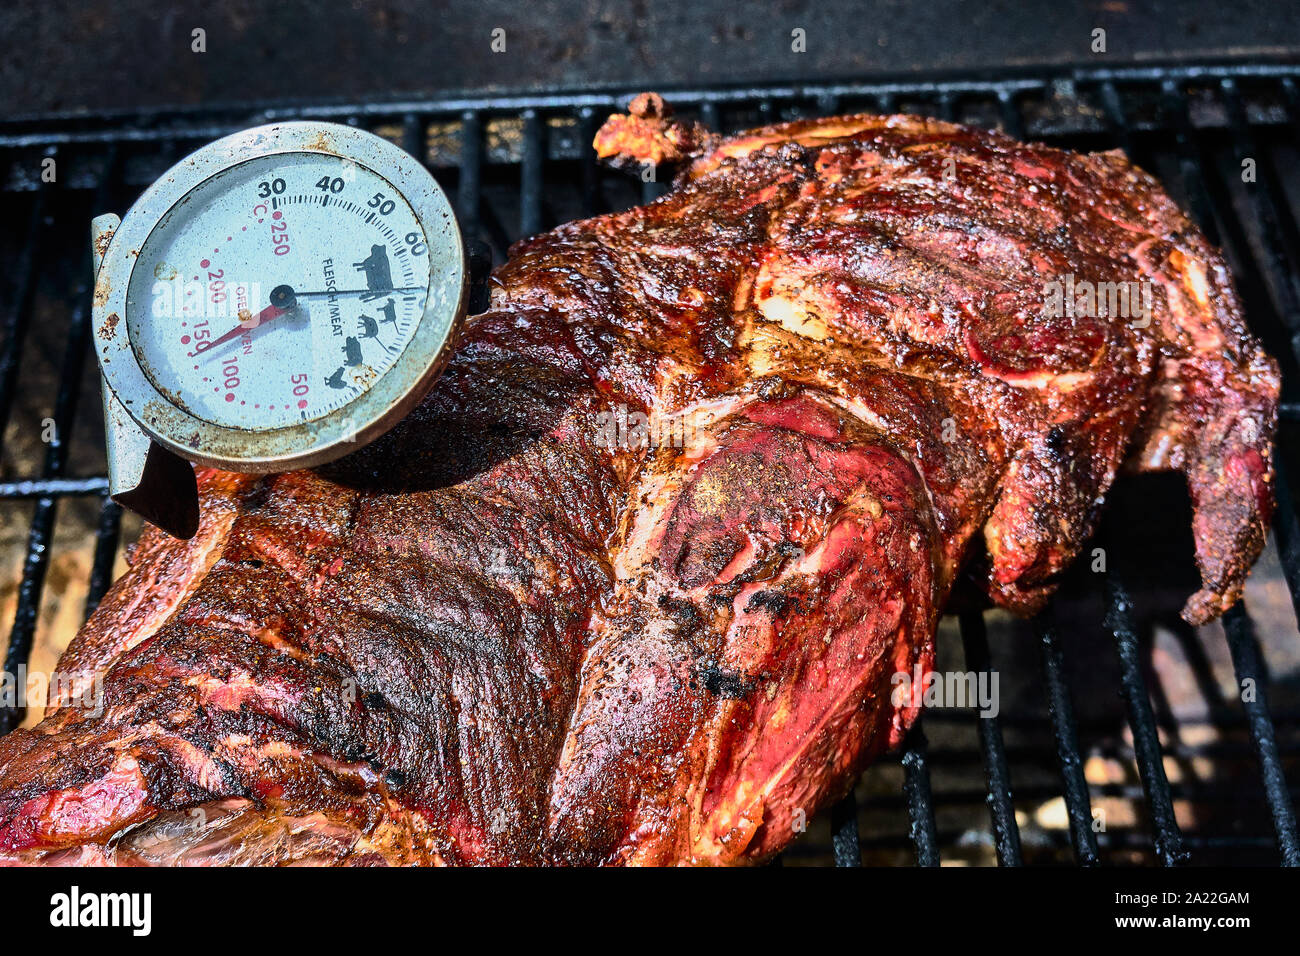 https://c8.alamy.com/comp/2A22GAM/roast-lamb-with-inserted-meat-thermometer-on-the-grill-rack-2A22GAM.jpg